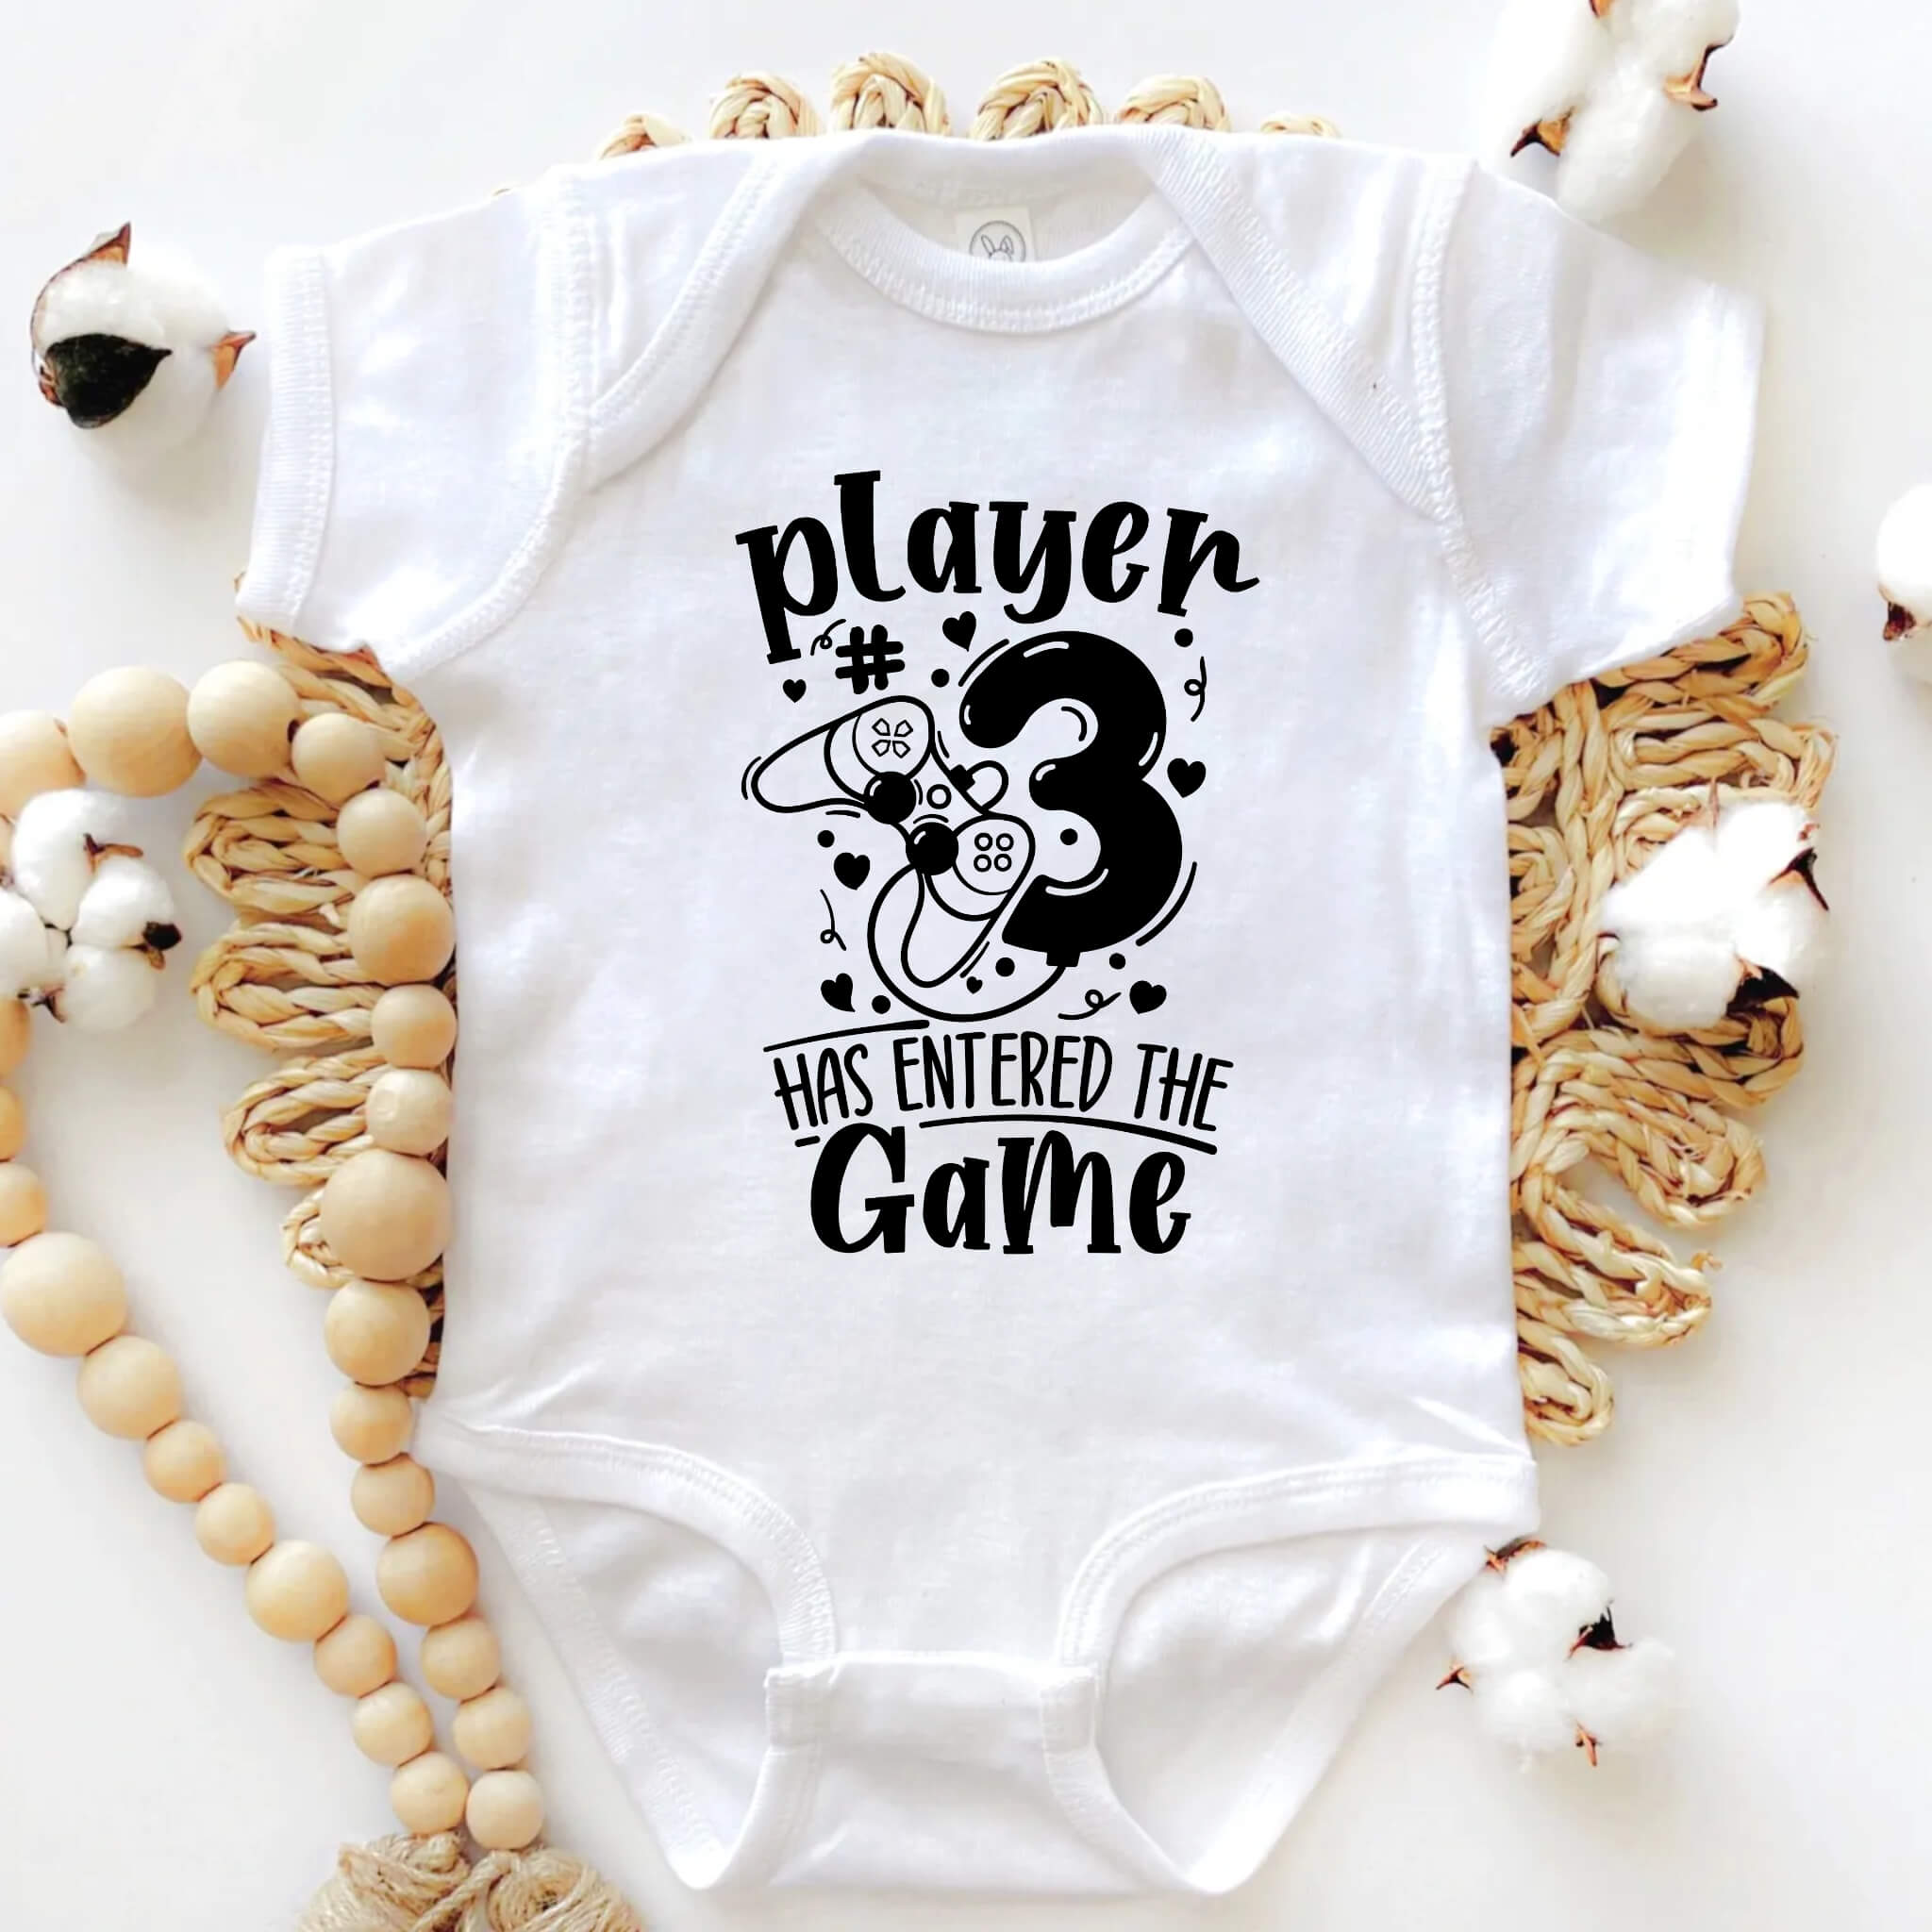 Personalized Pregnancy Announcement, Player 1, 2, 3, 4 Has Entered The Game, Dad, Grandma, Grandpa, Auntie, Uncle To Be, Gamer Pregnancy Announcement, Video Gamer Customized Baby Pregnancy Announcement Onesie